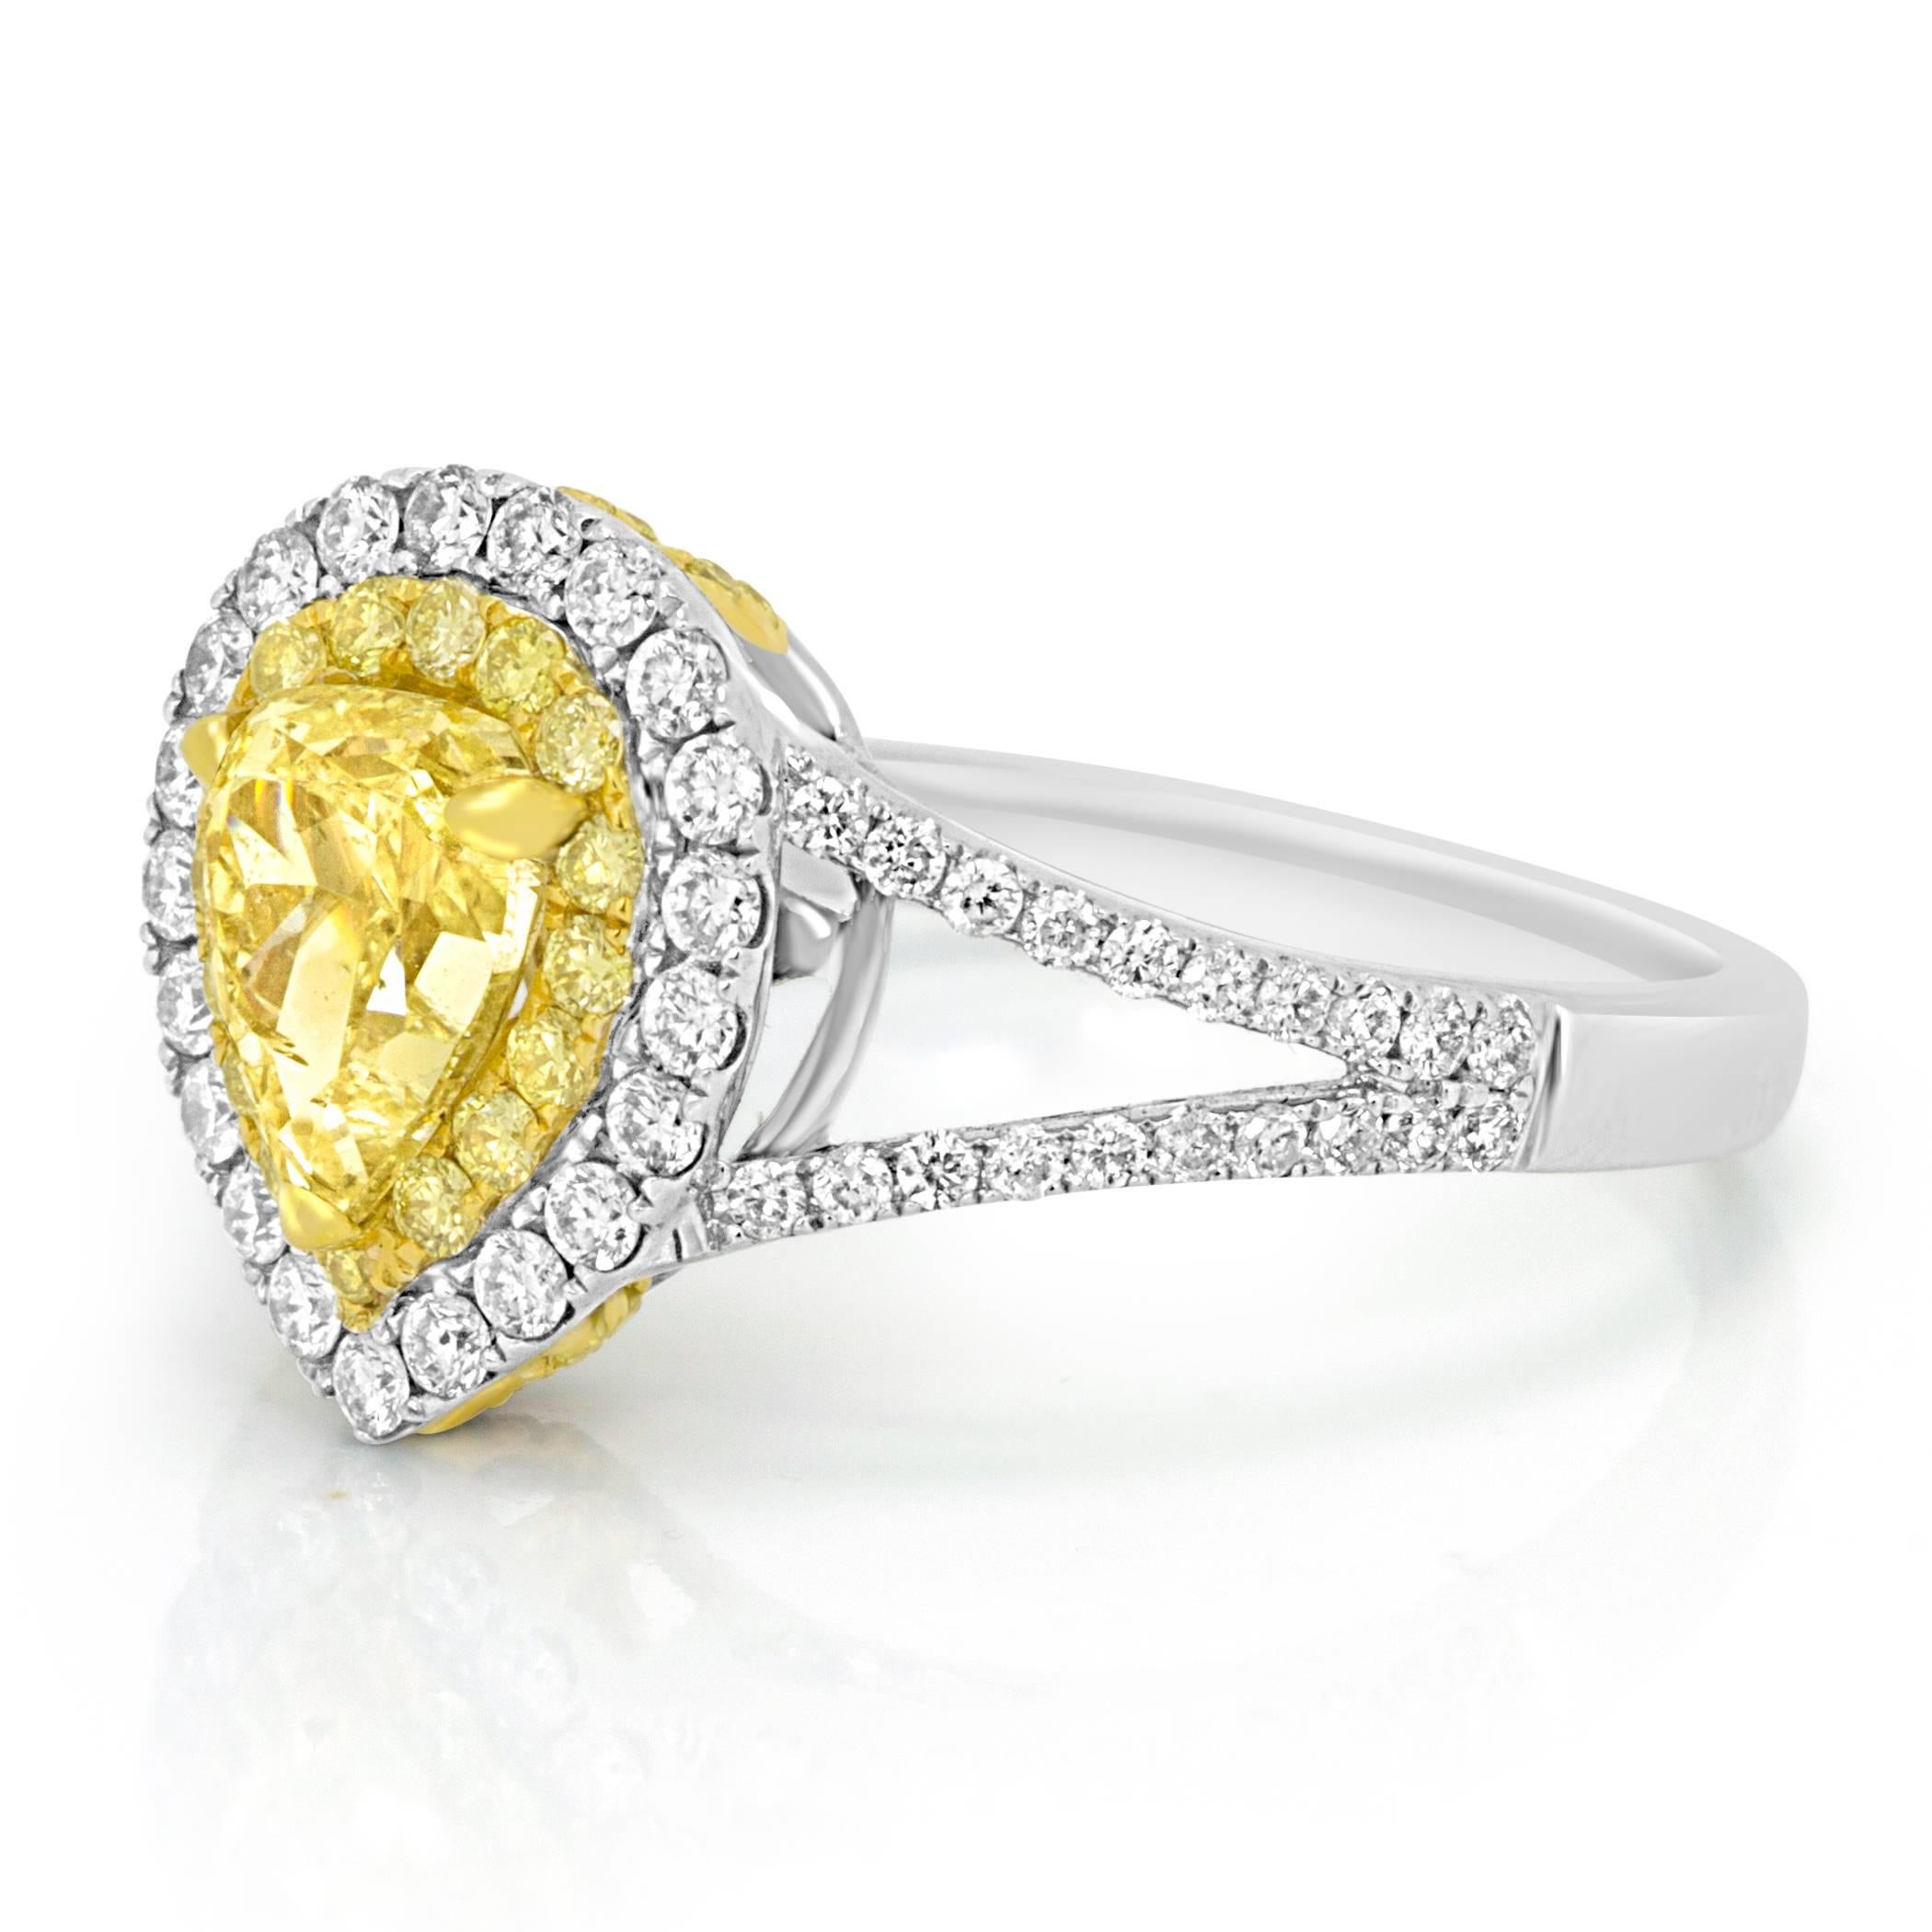 Natural Fancy Yellow Diamond Pear SI Clarity 1.09 Carat encircled in Double Halo of Natural Fancy Yellow Round Diamonds VS-SI Clarity 0.22 Carat and White G-H Color Diamond Round VS-SI Clarity 0.53 Carat in 18K White and Yellow Gold Bridal Fashion